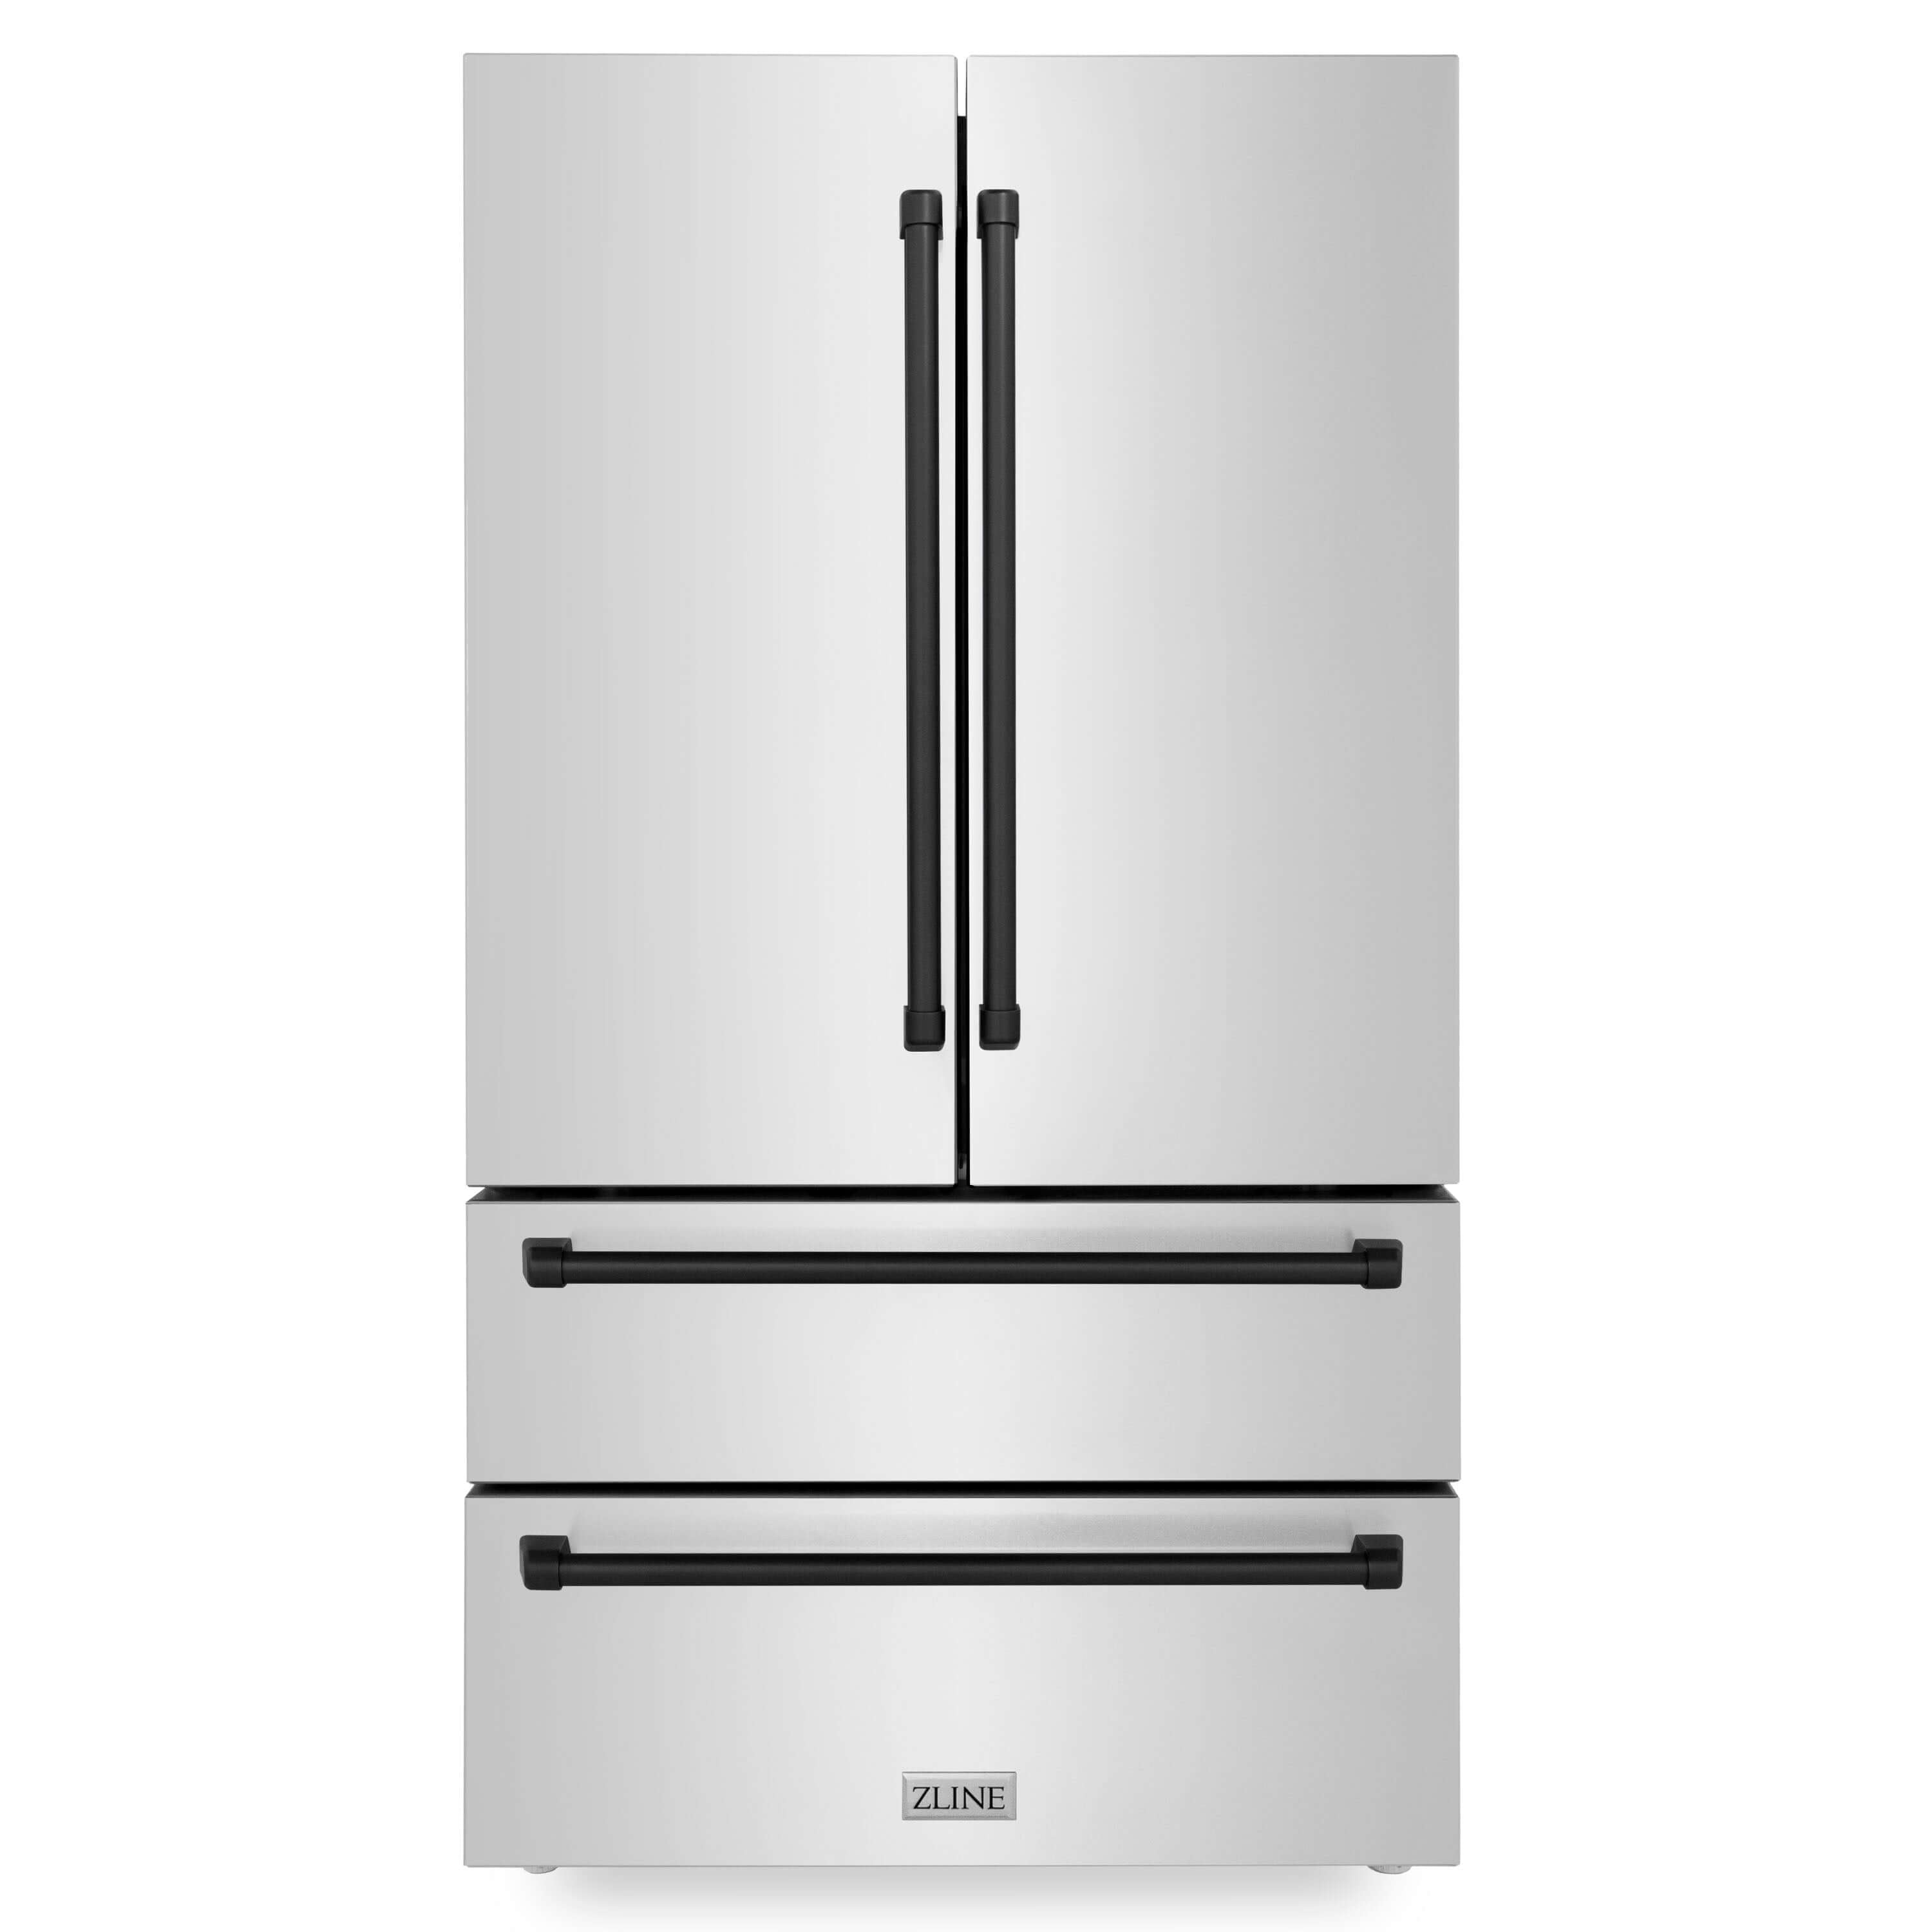 ZLINE Autograph Edition 36 in. 22.5 cu. ft Freestanding French Door Refrigerator with Ice Maker in Fingerprint Resistant Stainless Steel with Matte Black Accents (RFMZ-36-MB) front, closed.